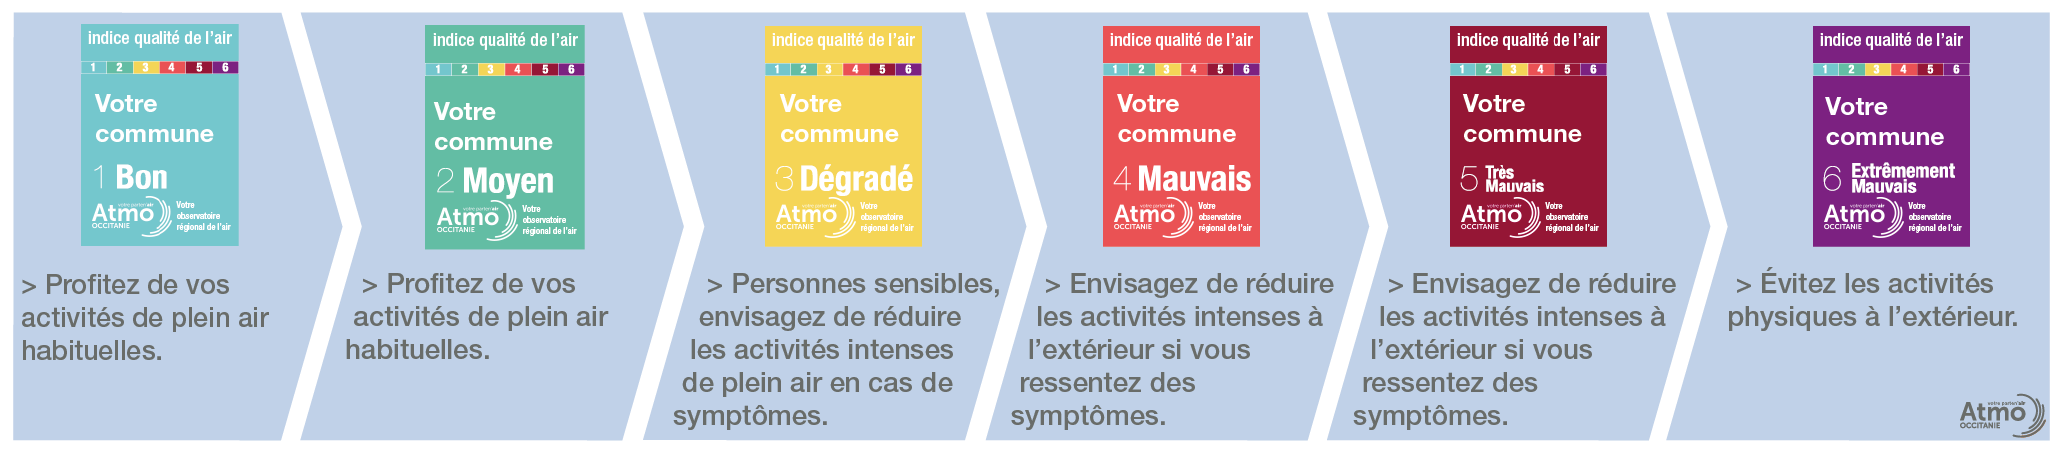 recommandations sanitaires indice 